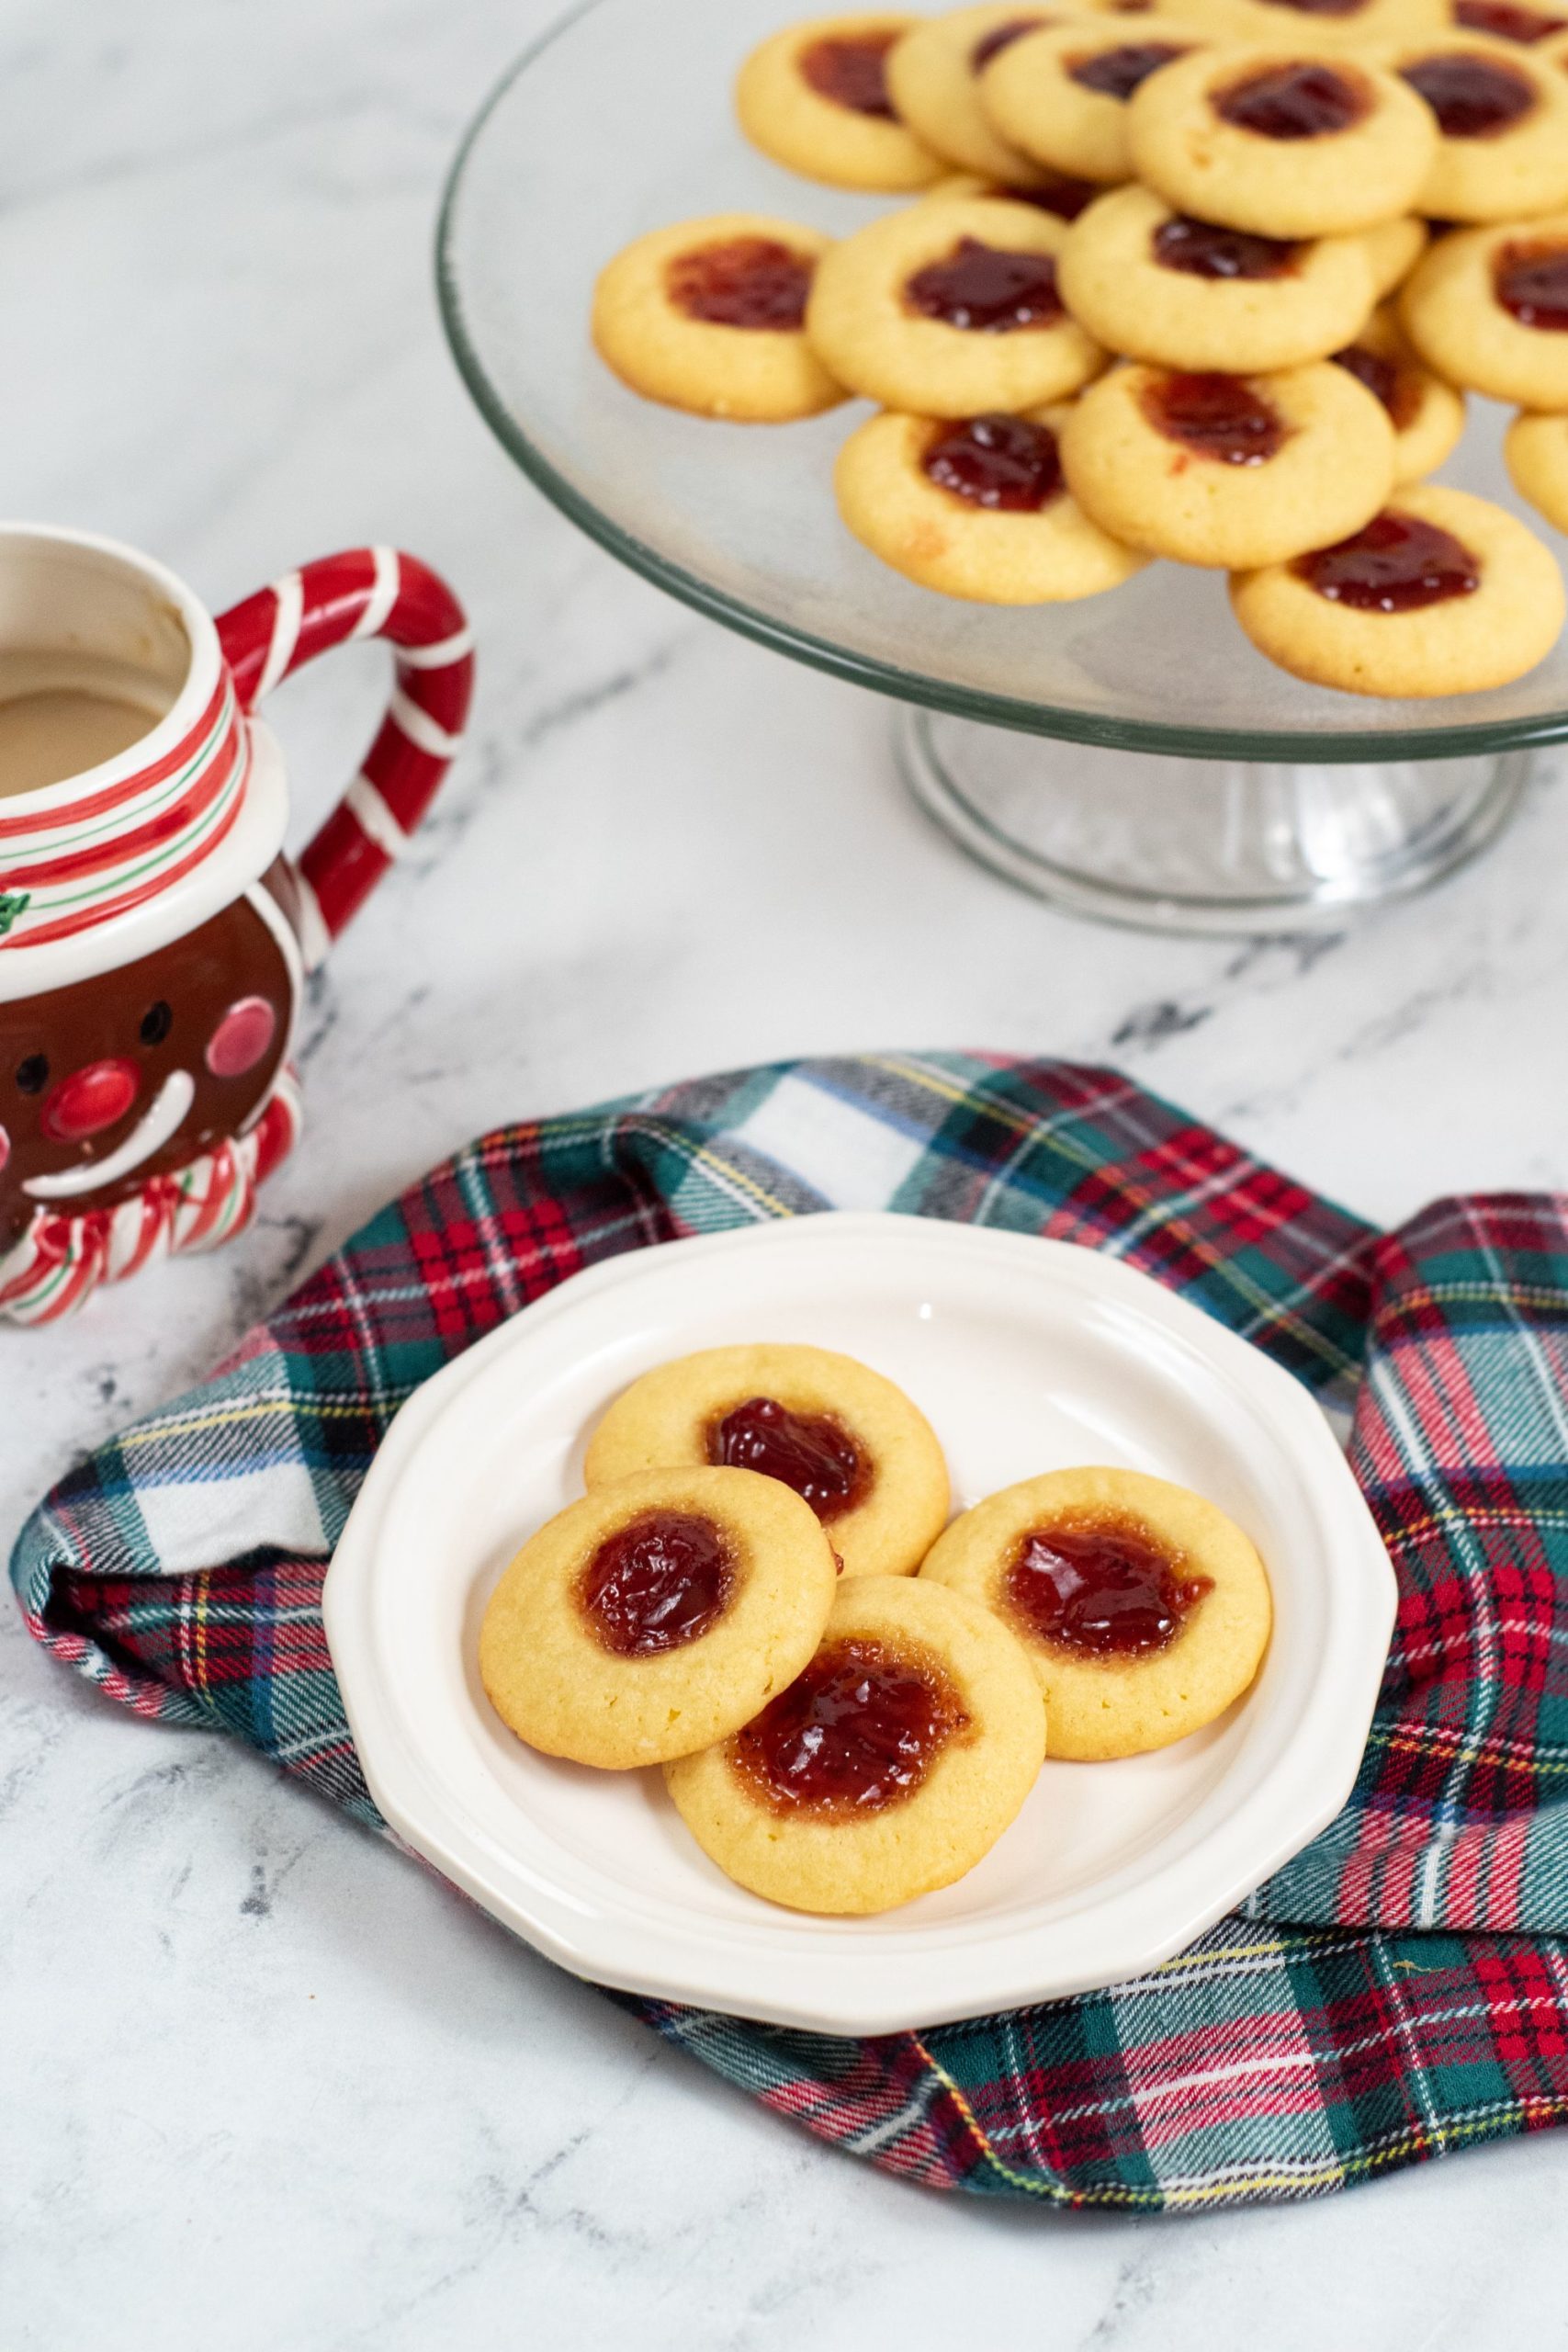 Jam thumbprint cookies on a white plate with a plaid napkin